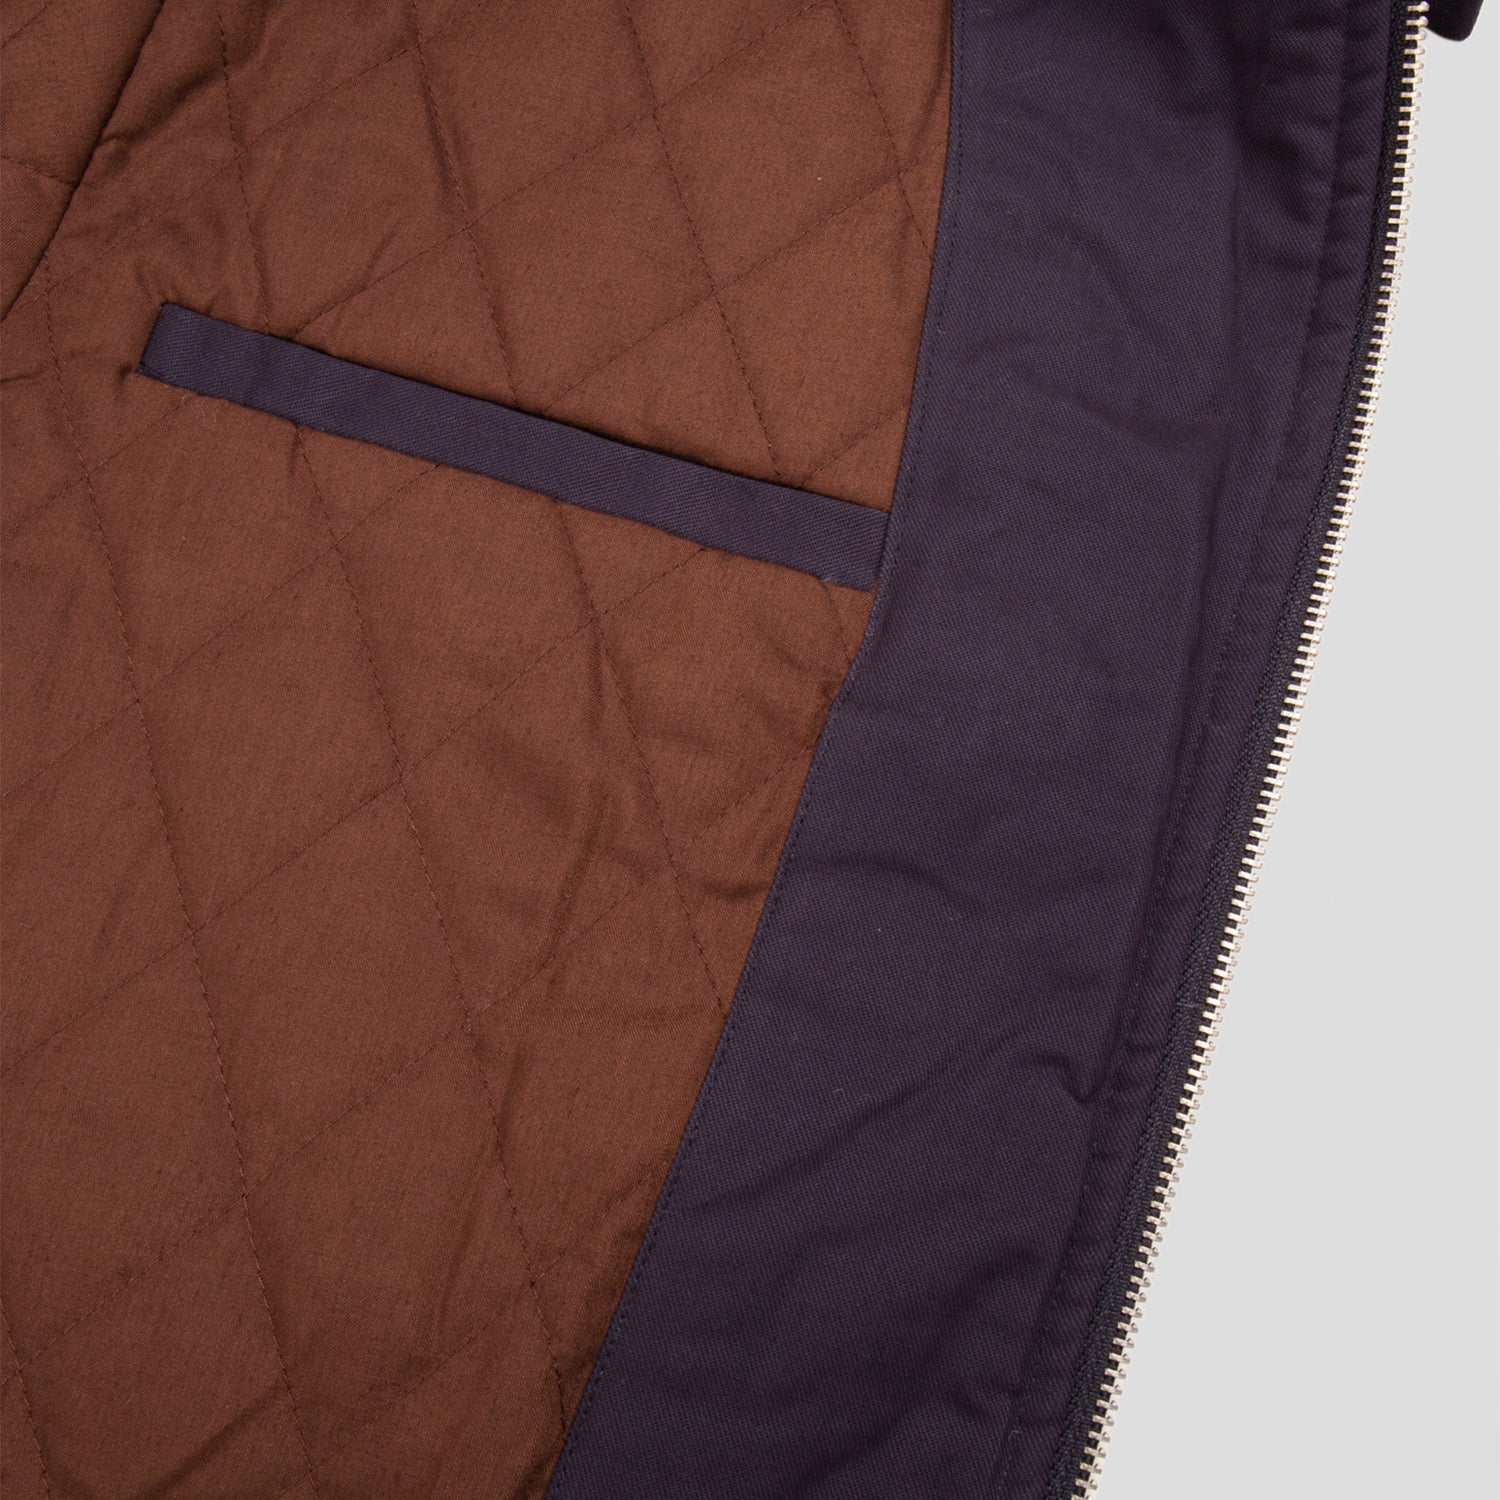 PASS~PORT "DELIVERY" JACKET NAVY